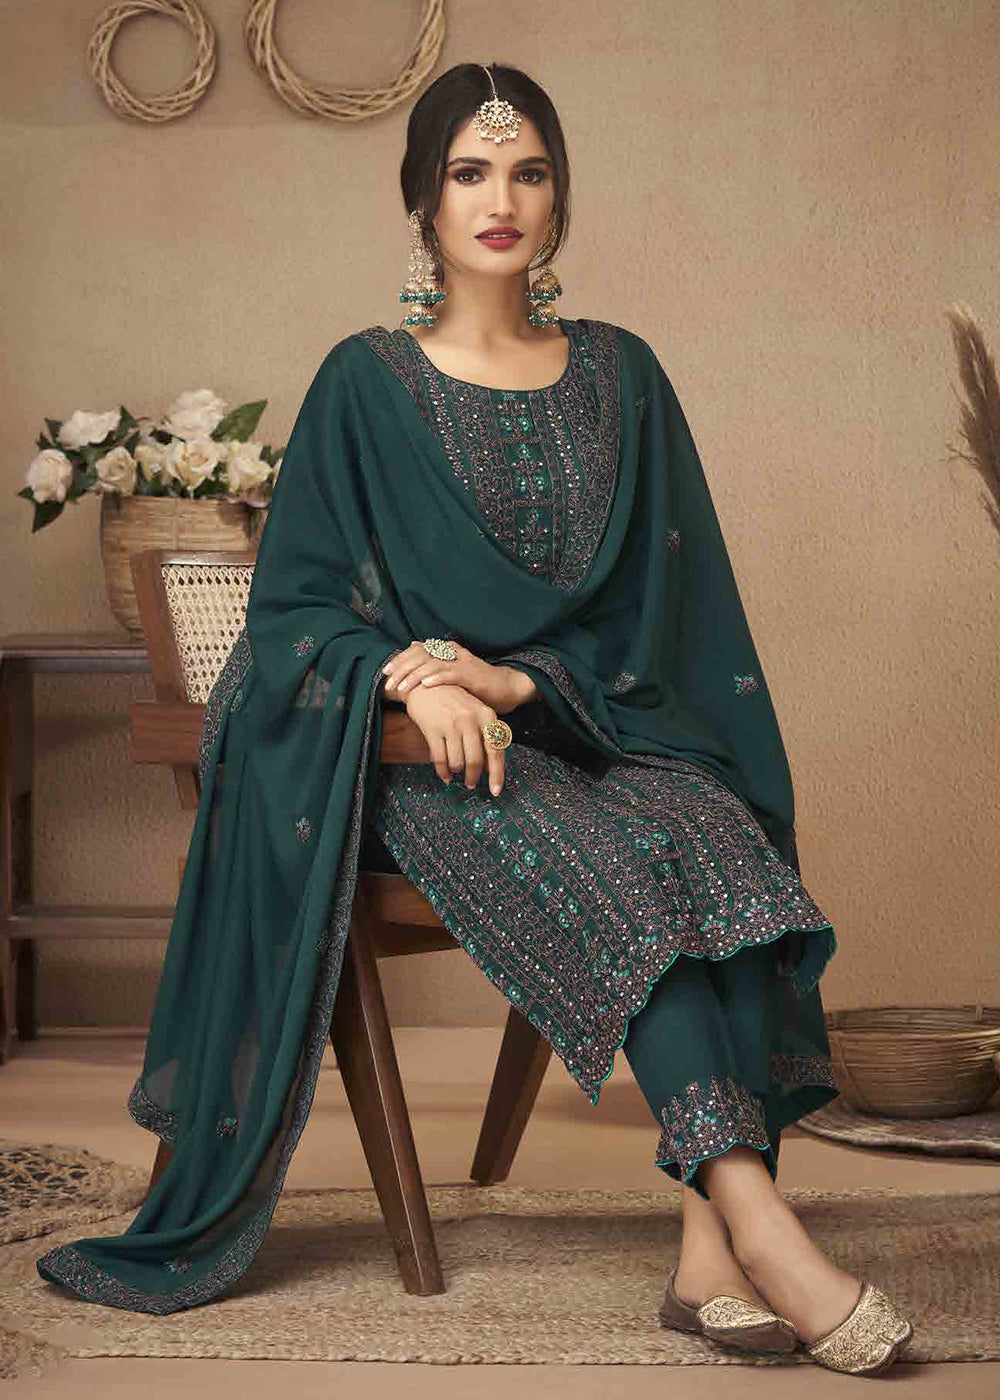 Buy Now Teal Green Cording & Swarovski Embroidered Trendy Salwar Suit Online in USA, UK, Canada, Germany, Australia & Worldwide at Empress Clothing. 